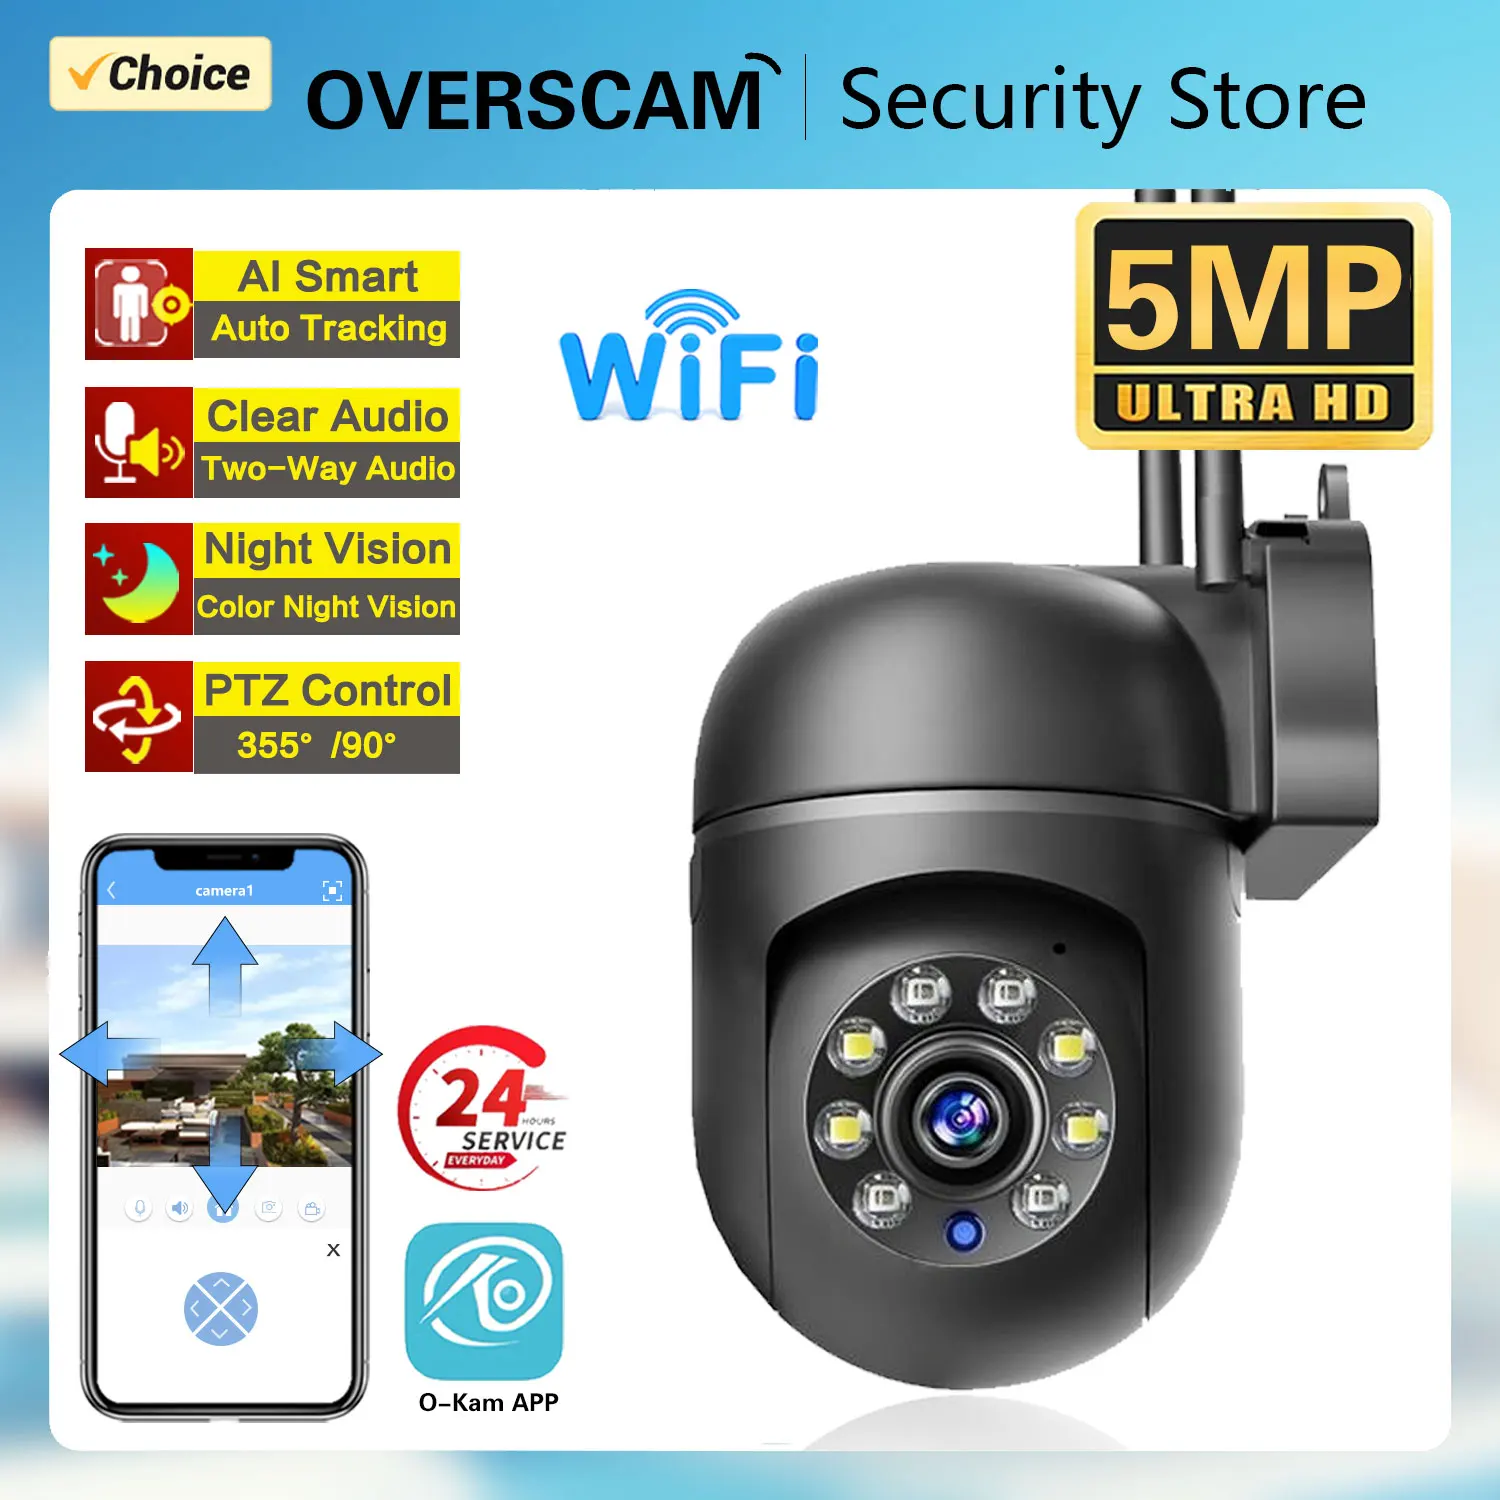 5MP Wifi IP Cameras Outdoor Surveillance PTZ Cam Security Protection CCTV Auto Tracking Night Vision Two Way Audio OKam 5G